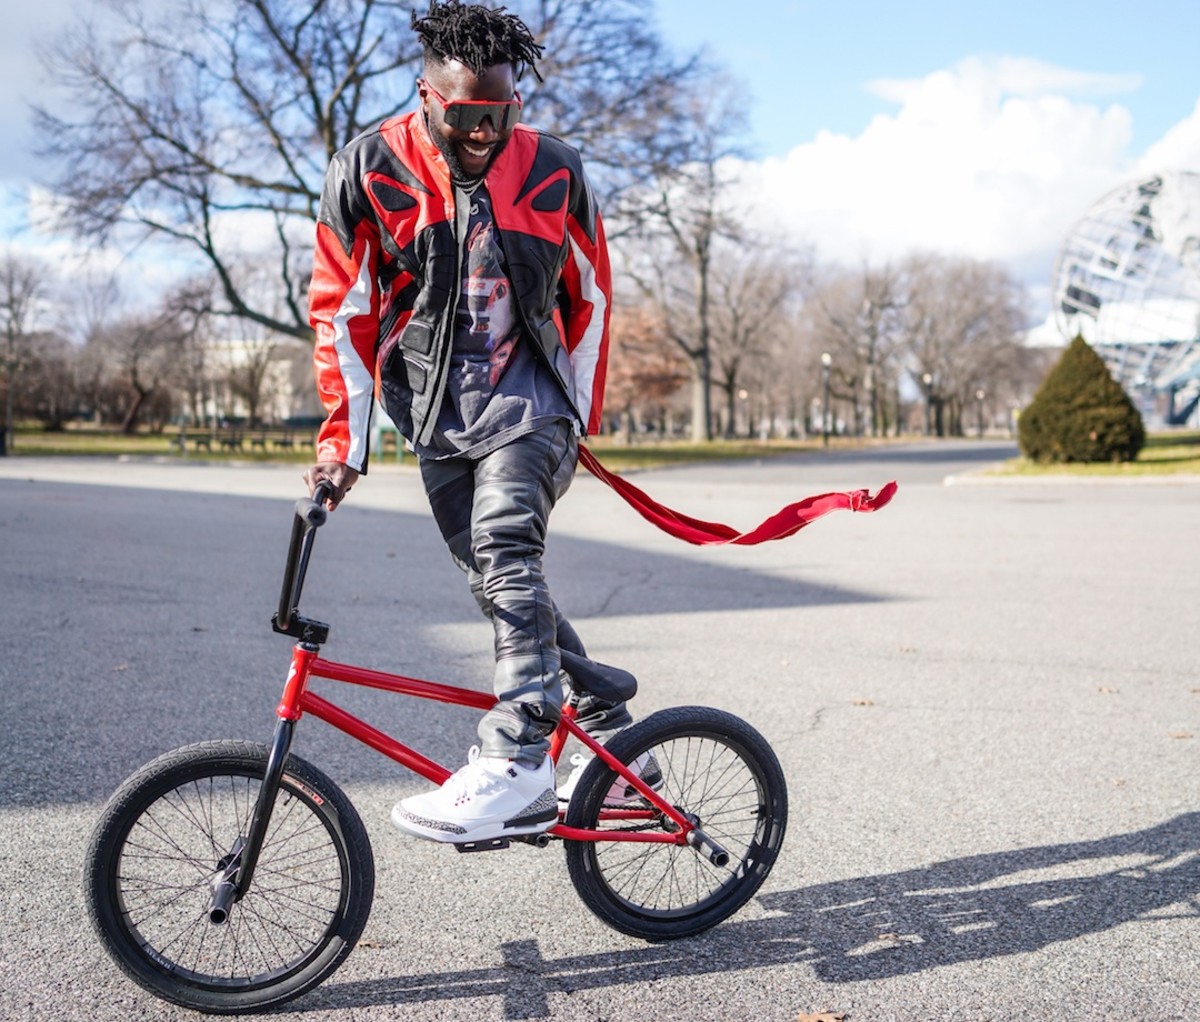 How much time does Nigel Sylvester spend in the gym? None